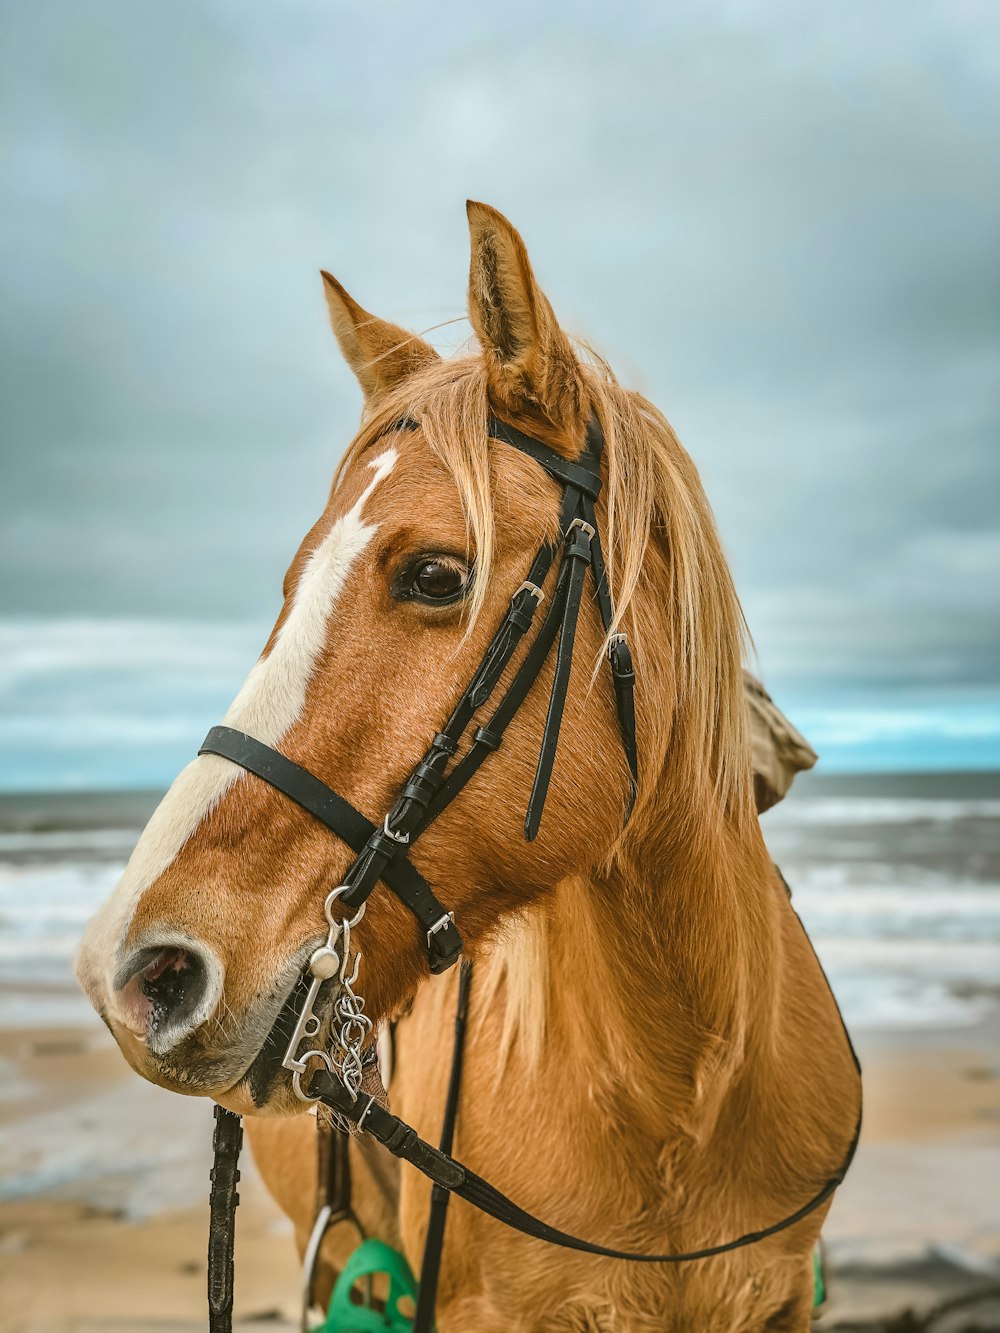 brown horse on beach during daytime